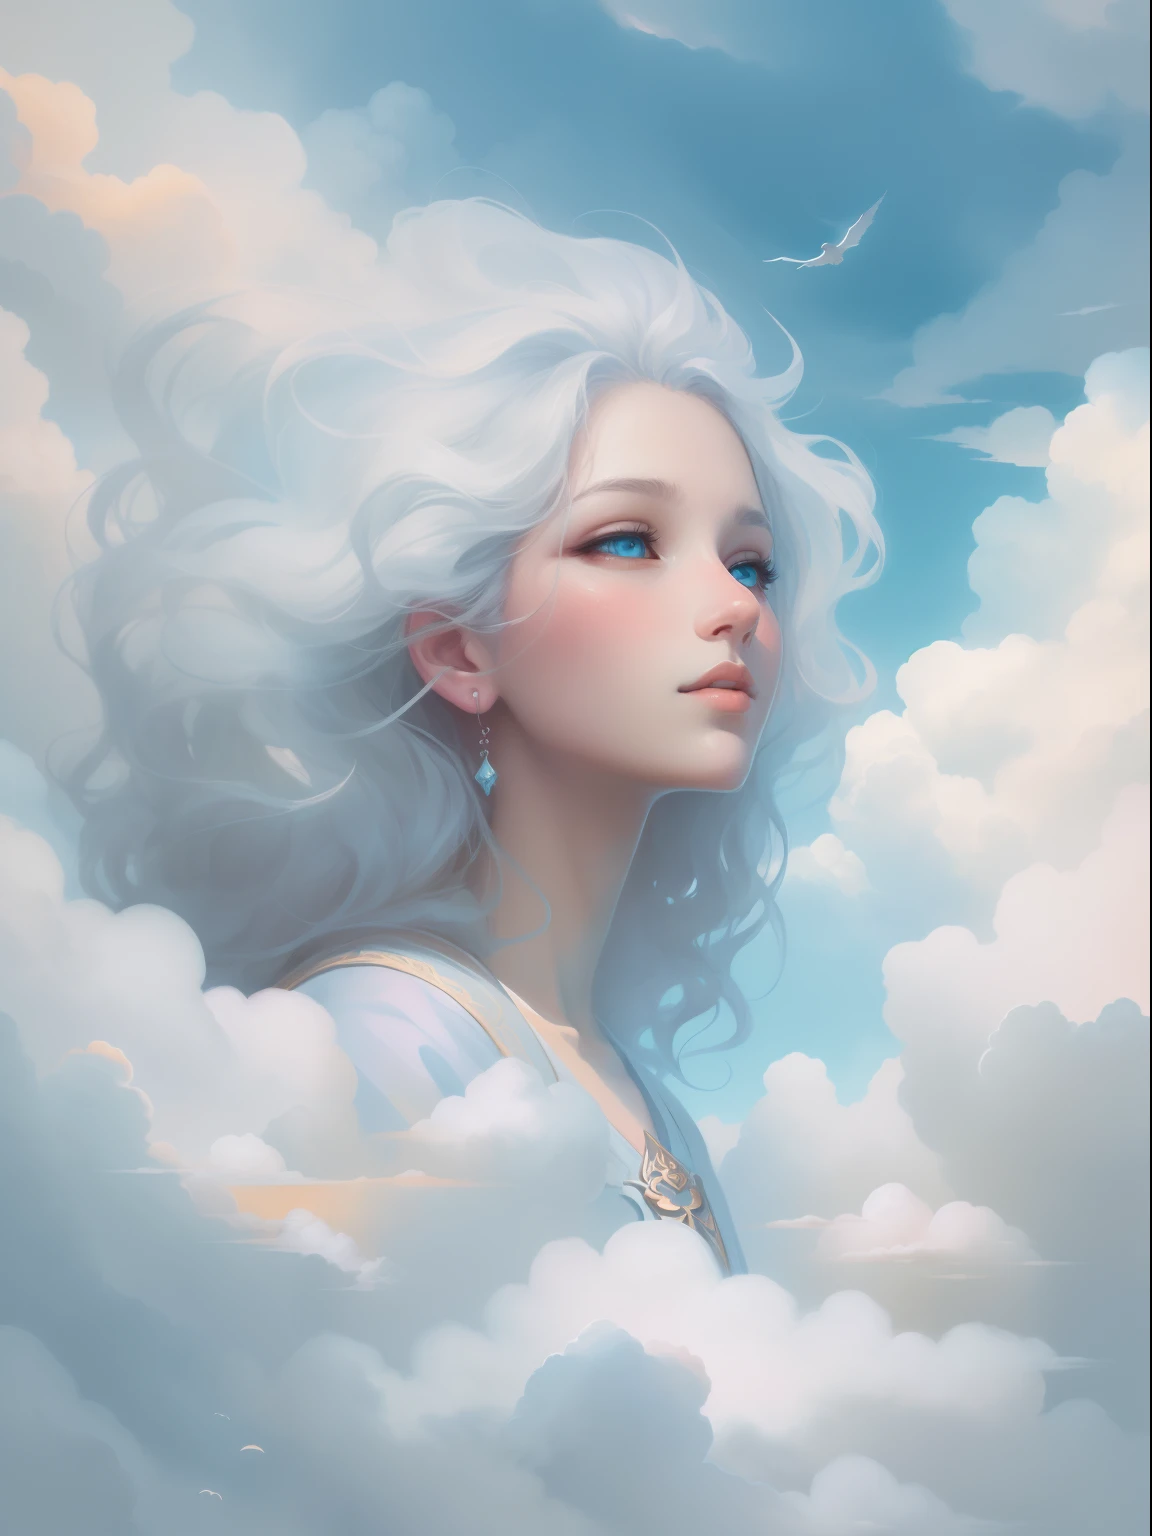 A beautiful artwork illustration, beautiful fantasy art portrait，Girl in the clouds in the sky，sitted，Beautiful facial features，pale blue color eyes，((Reach out and touch the clouds，))Fluffy clouds，Guviz-style artwork, White cloud hair, Beautiful digital illustration, fantasy art portrait, Clouds. fantasy, guweiz masterpiece, Cloud hair